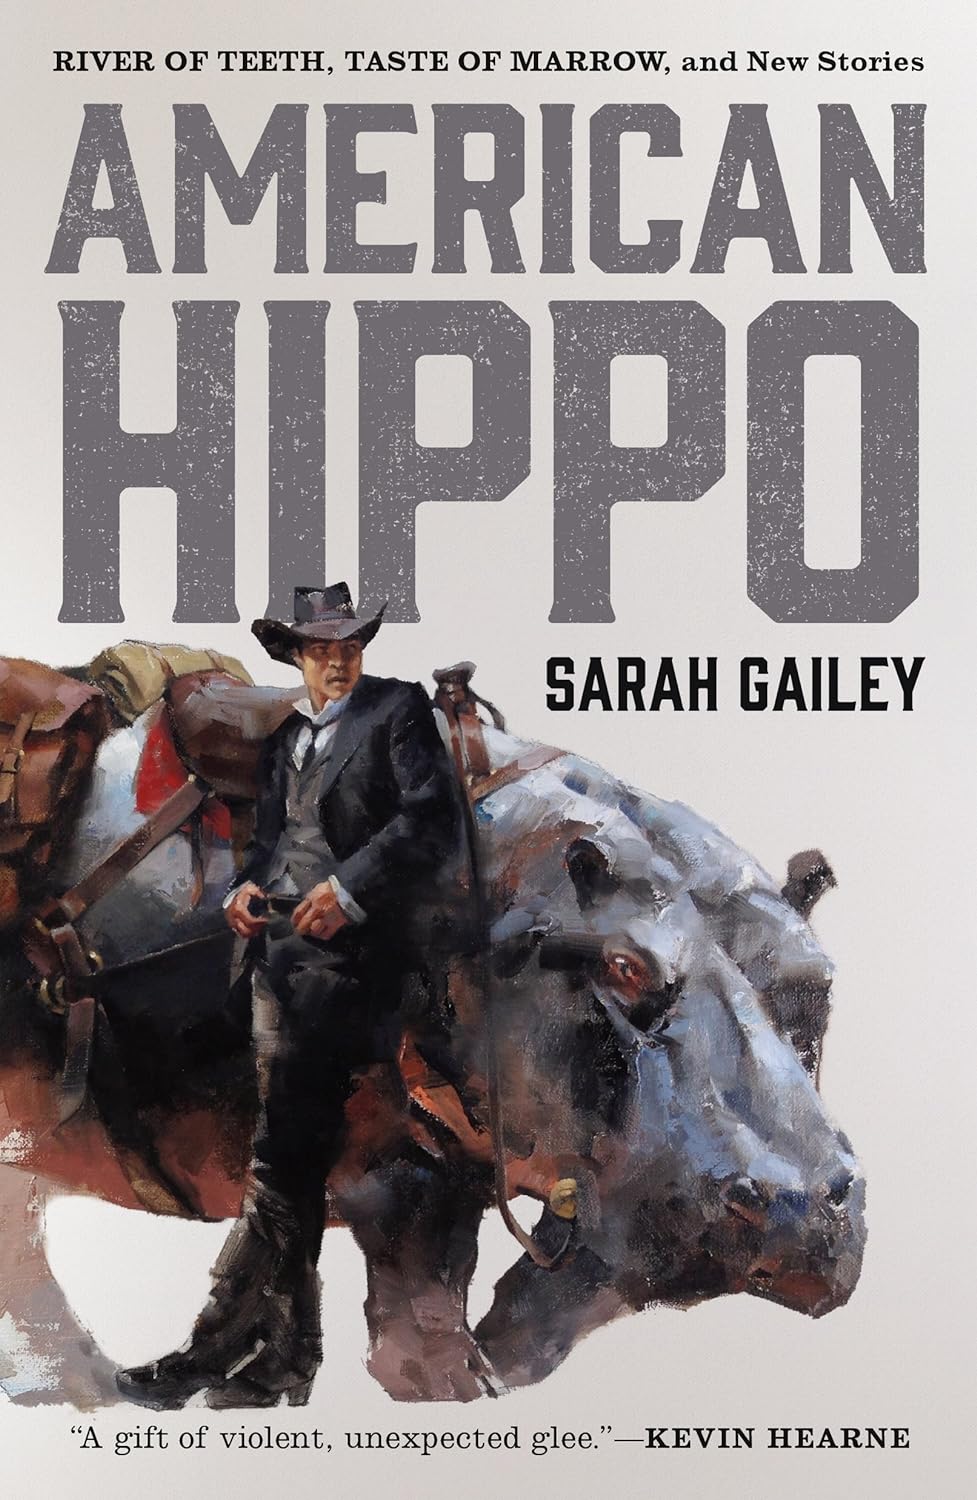 Sarah Gailey: American Hippo: River of Teeth, Taste of Marrow, and New Stories (2018, Tor.com)